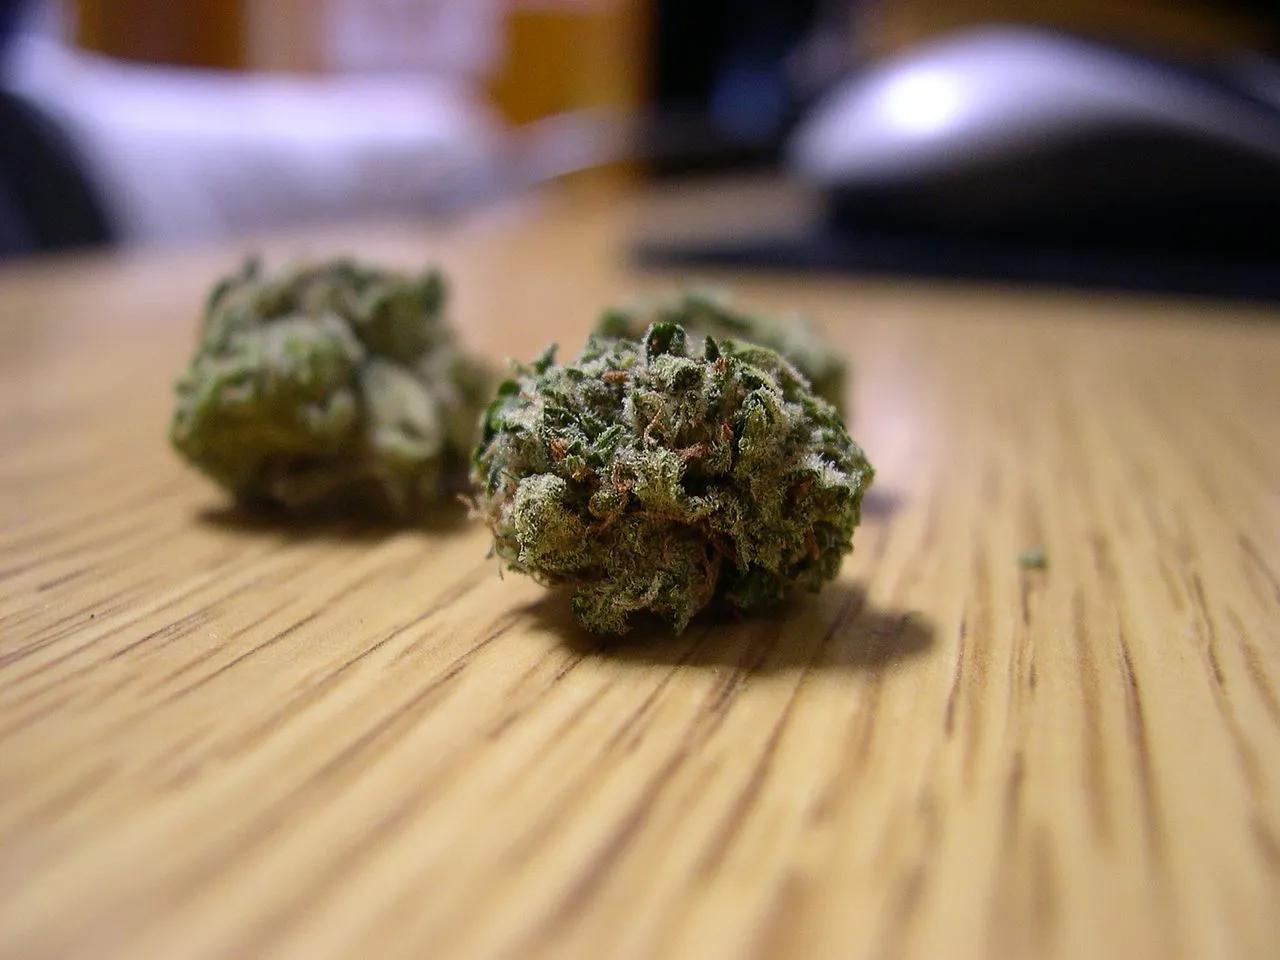 White Widow Weed on the Table